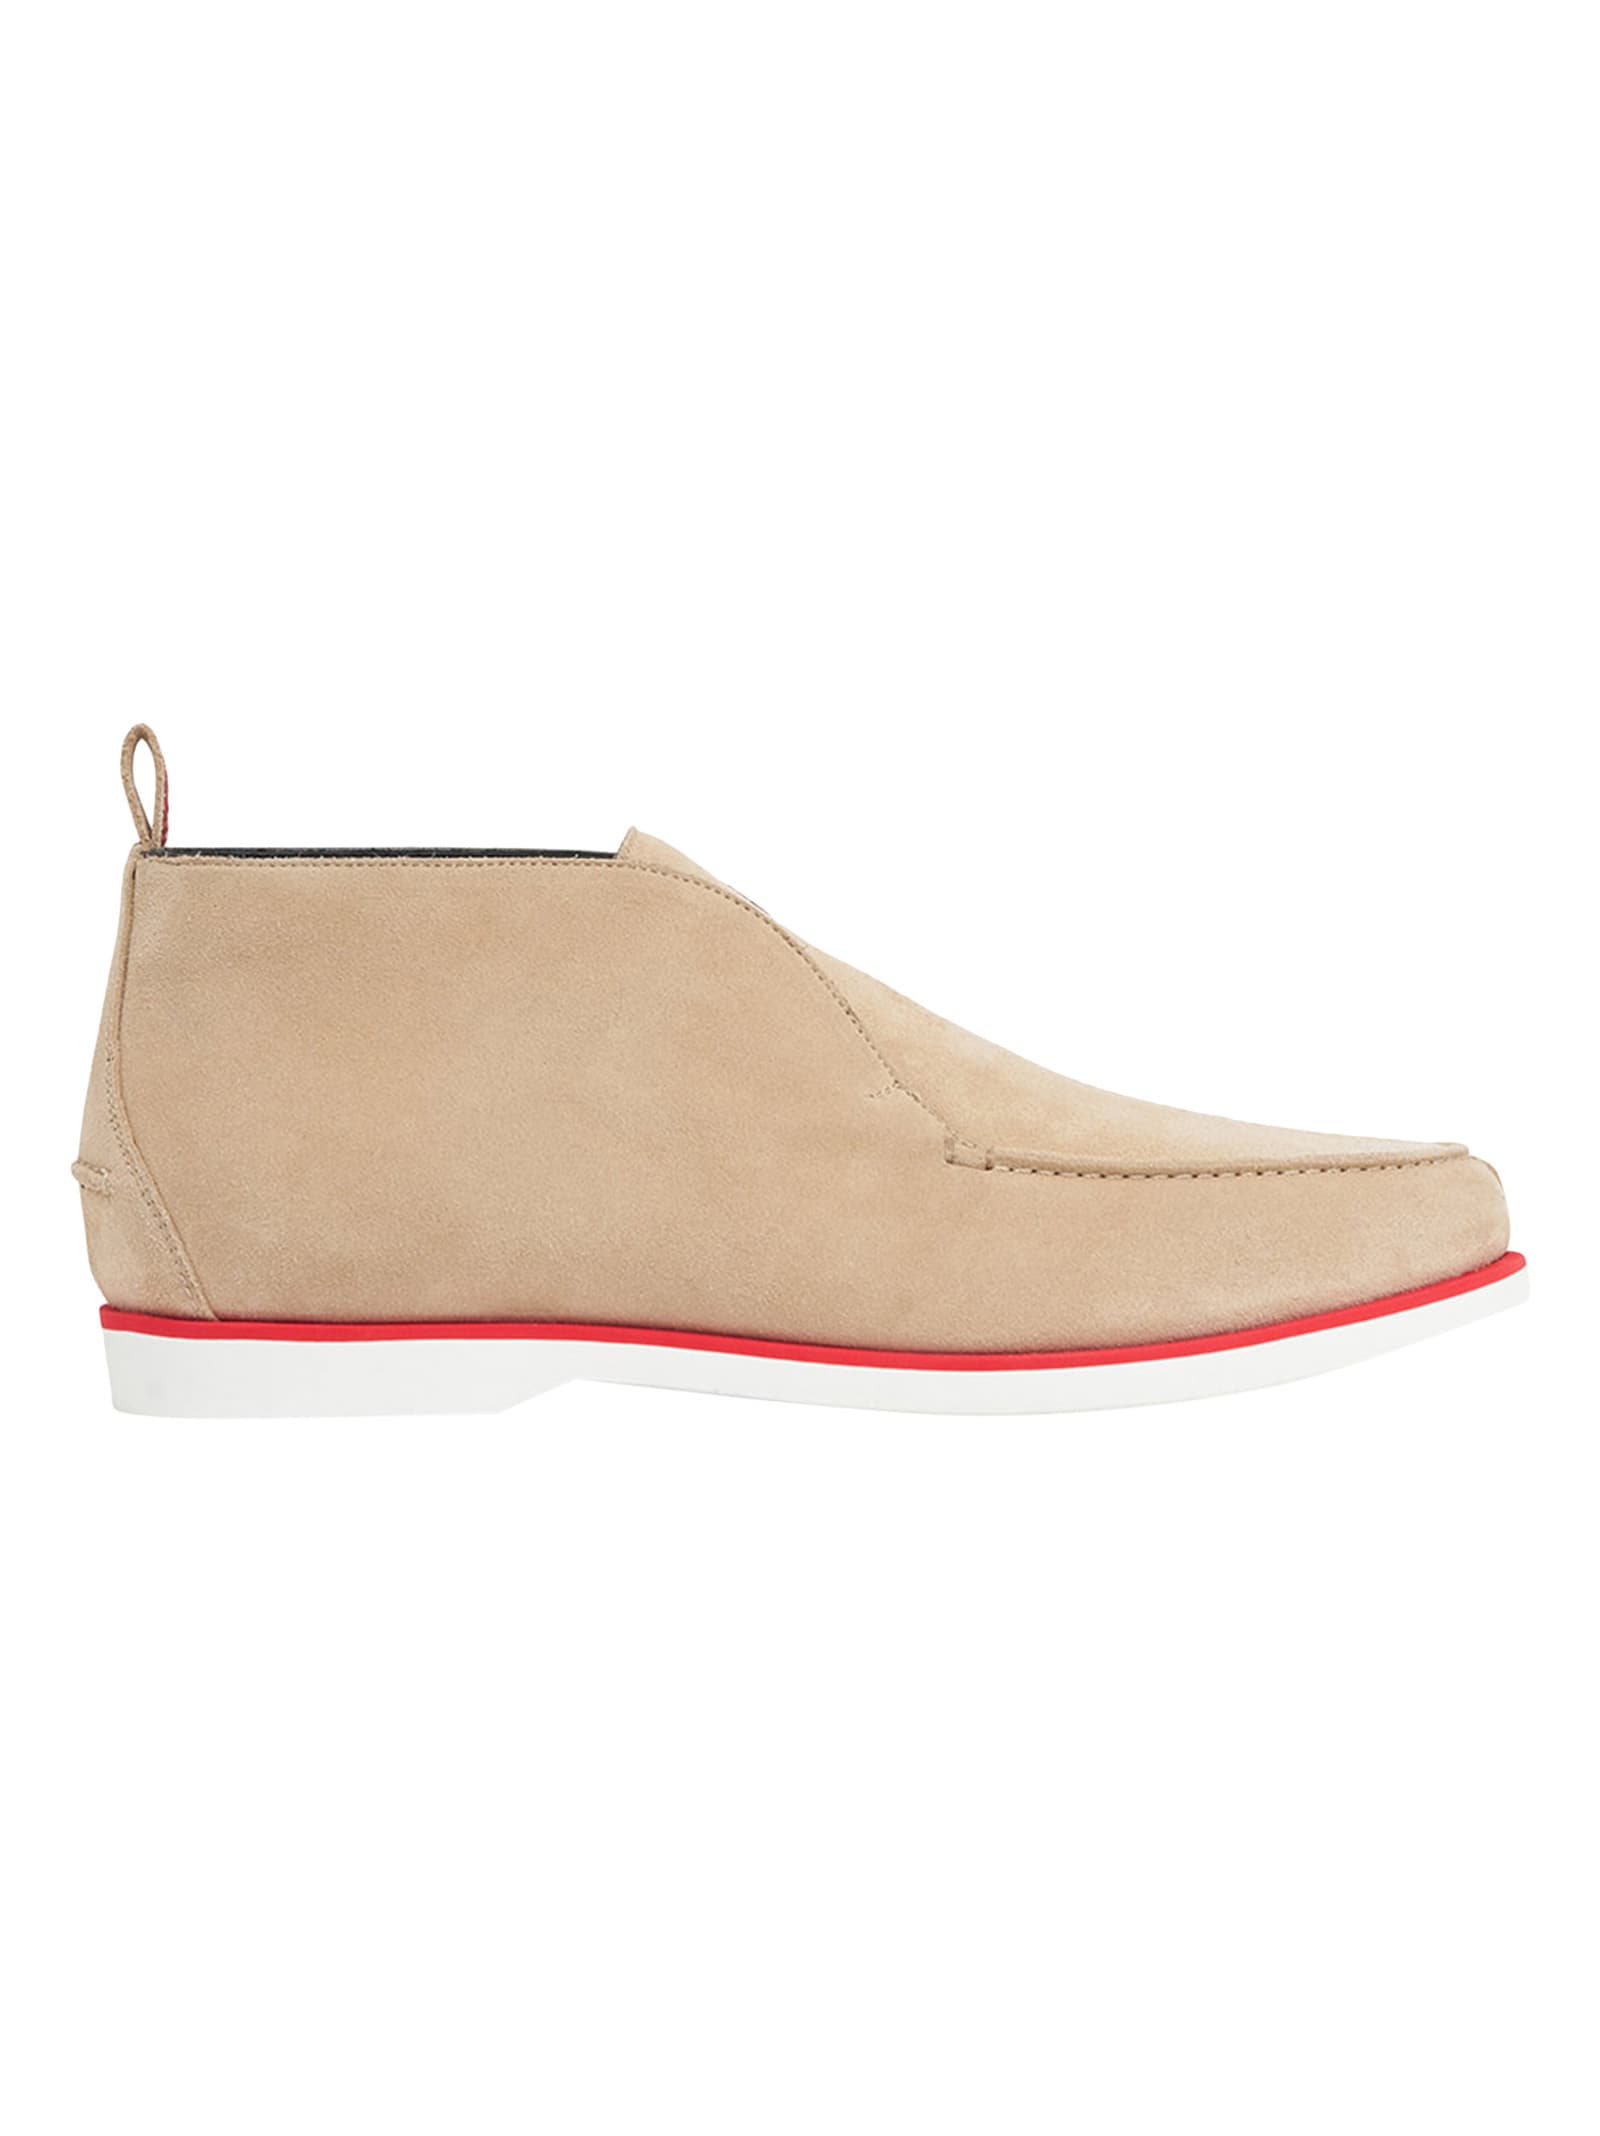 Kiton Ankle Shoes Calfskin In Beige